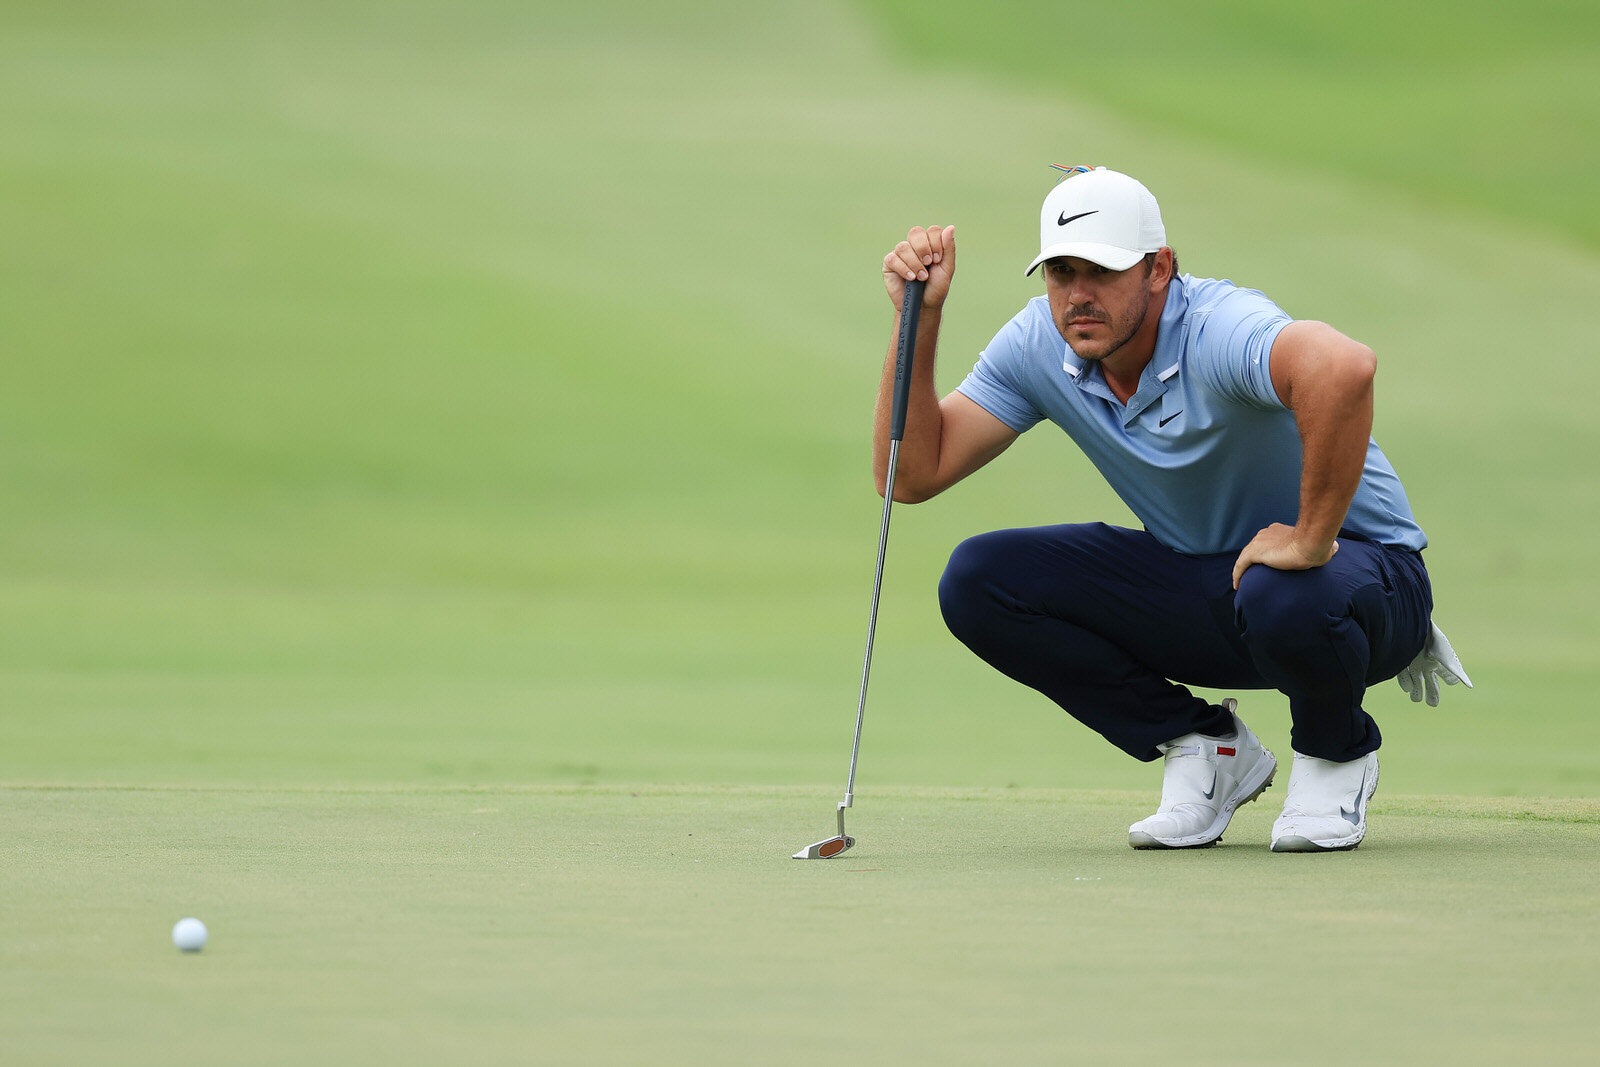  MEMPHIS, TENNESSEE - AUGUST 01: Brooks Koepka of the United States looks over a putt on the 16th green during the third round of the World Golf Championship-FedEx St Jude Invitational at TPC Southwind on August 01, 2020 in Memphis, Tennessee. (Photo